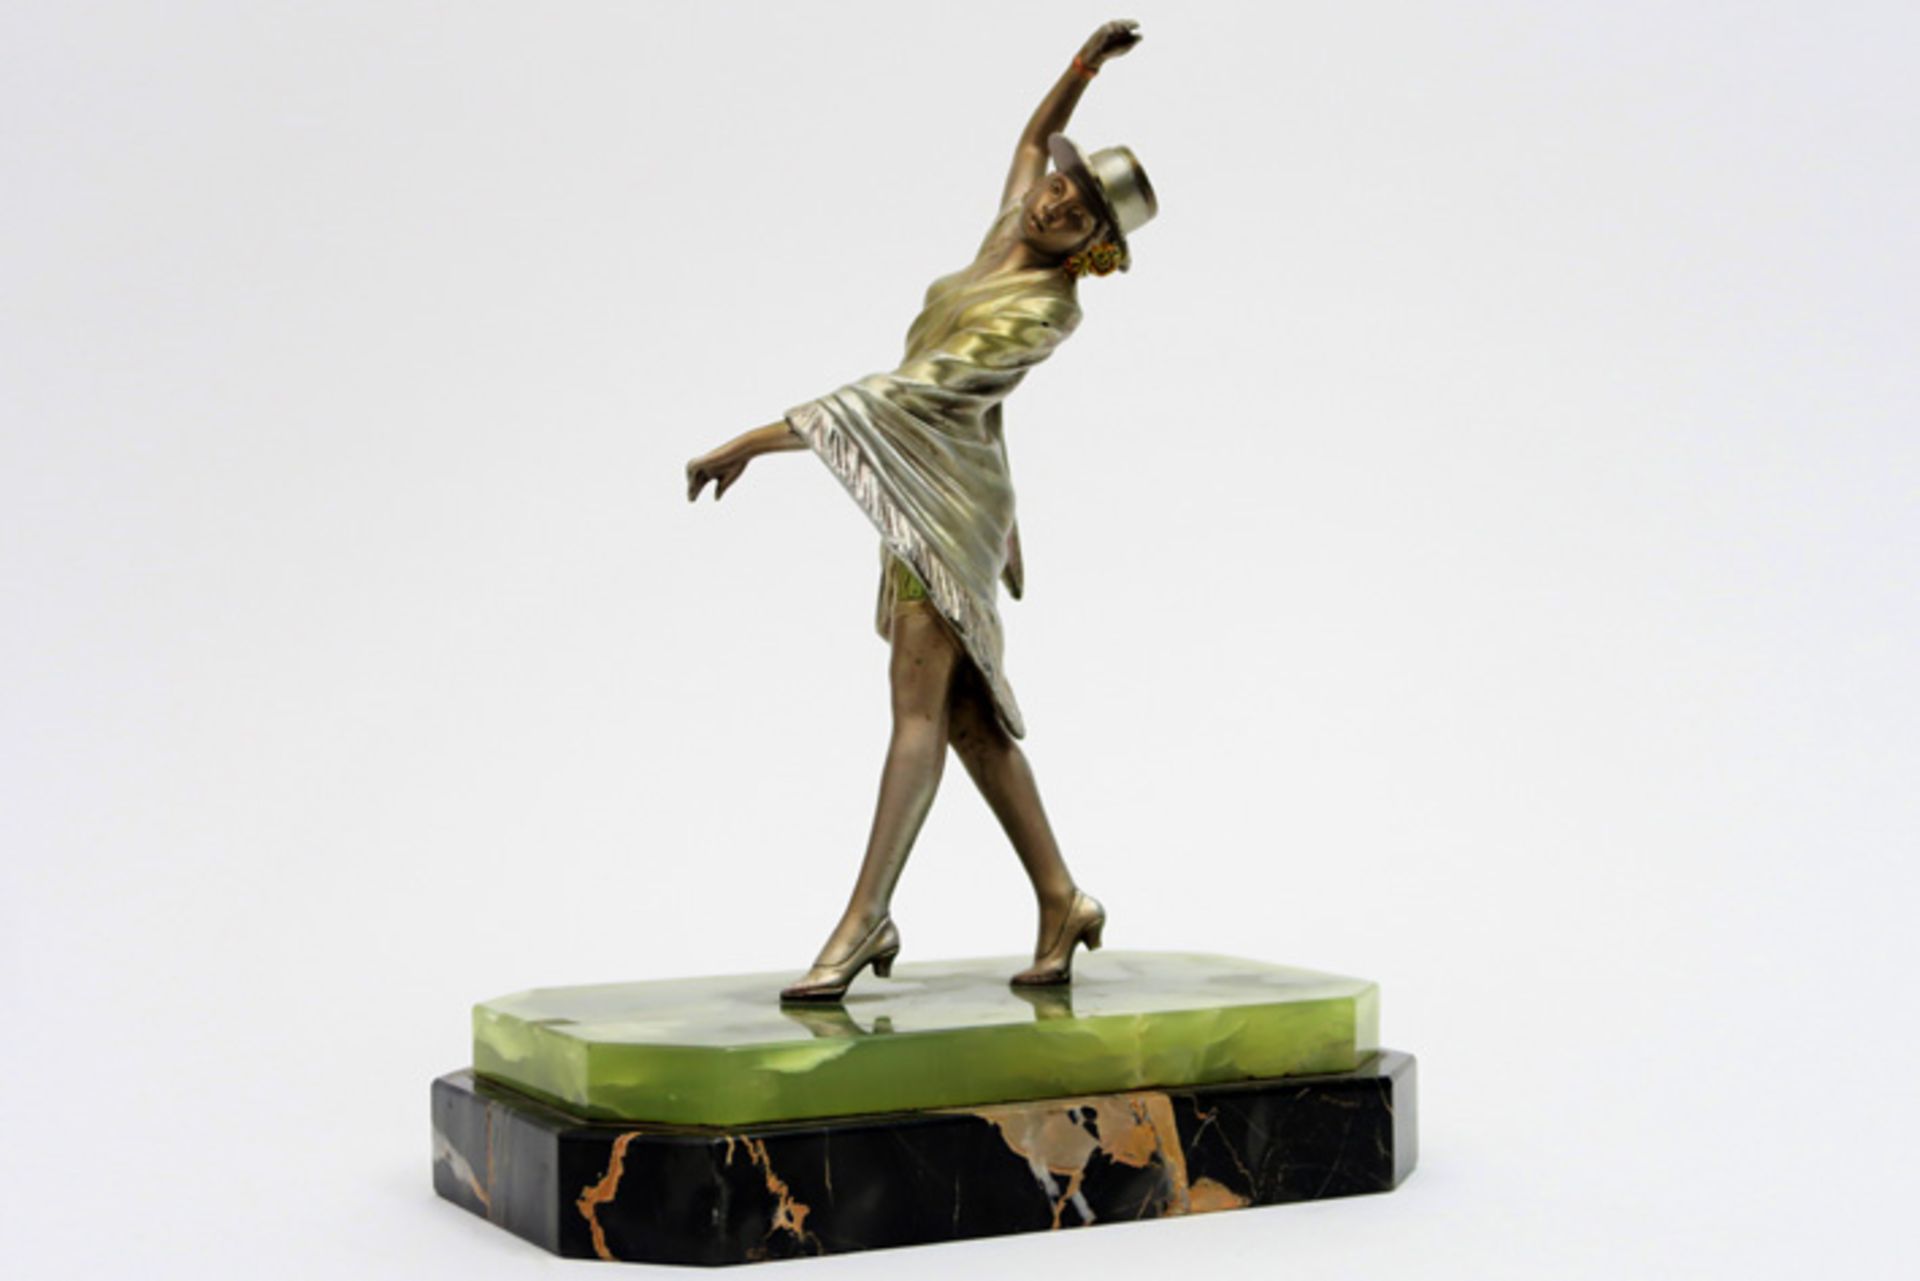 silverplated Art Deco "Dancing lady" sculpture on a base in onyx and marble Verzilverde Art Deco-